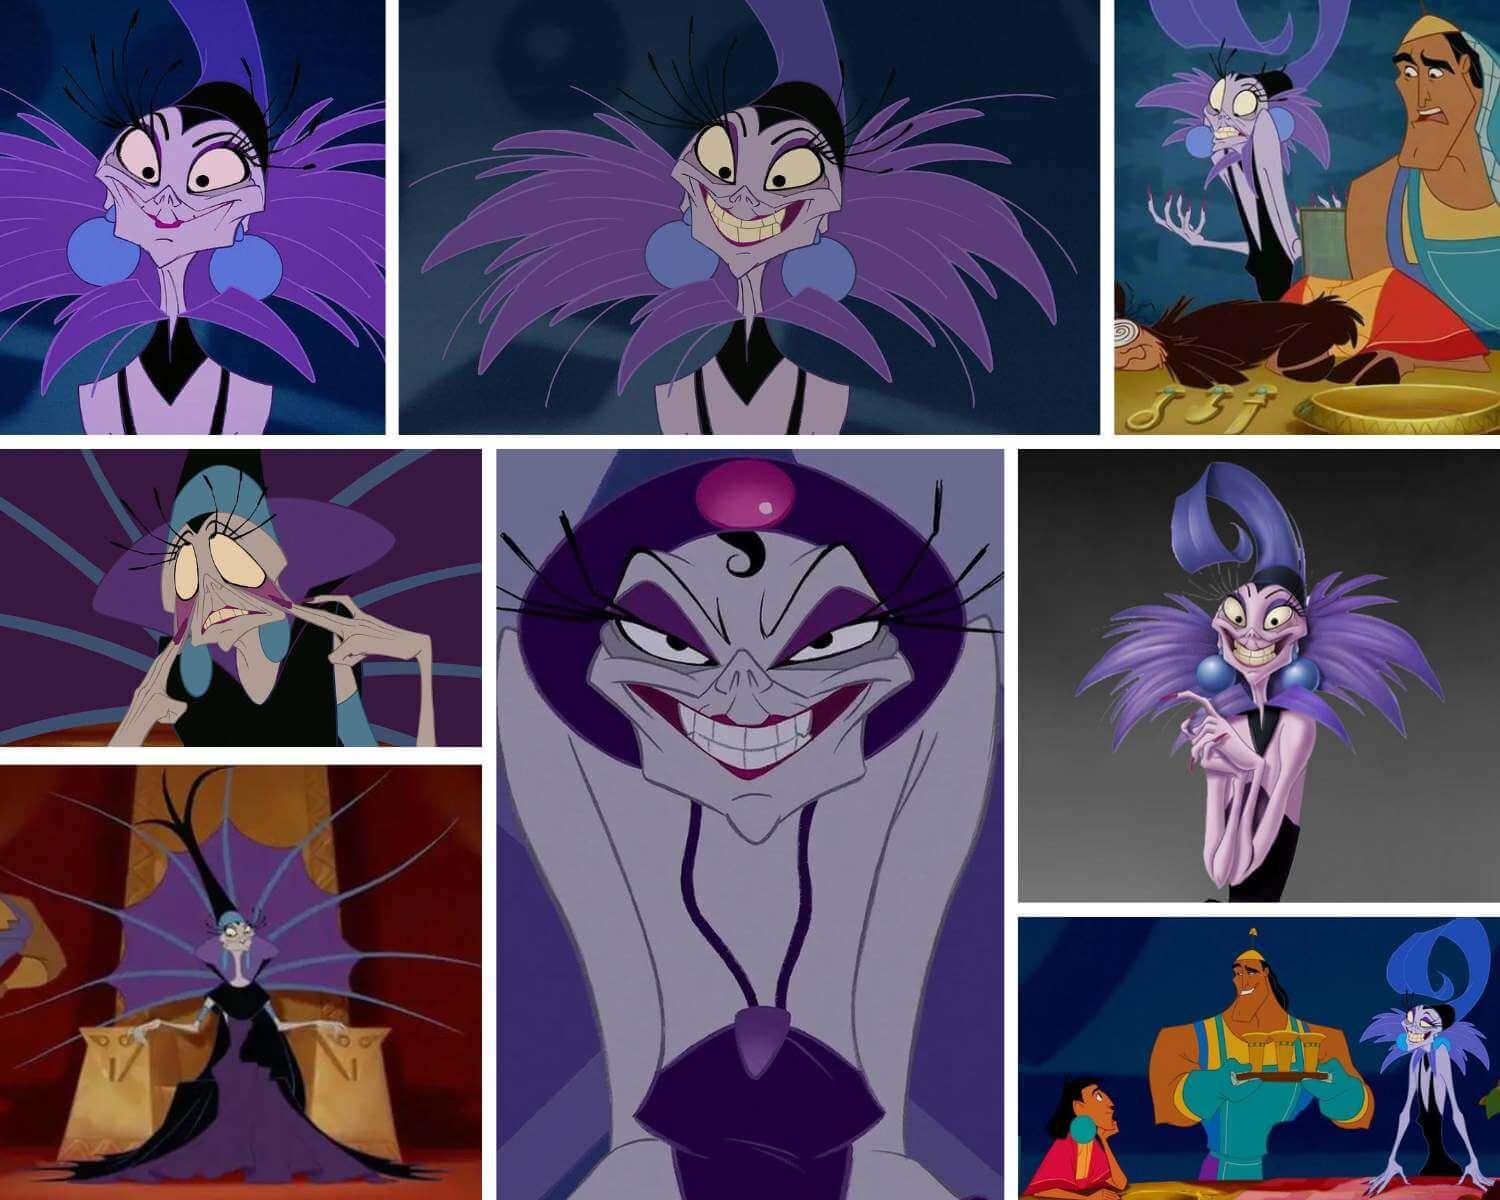 Questions and Answers about Yzma